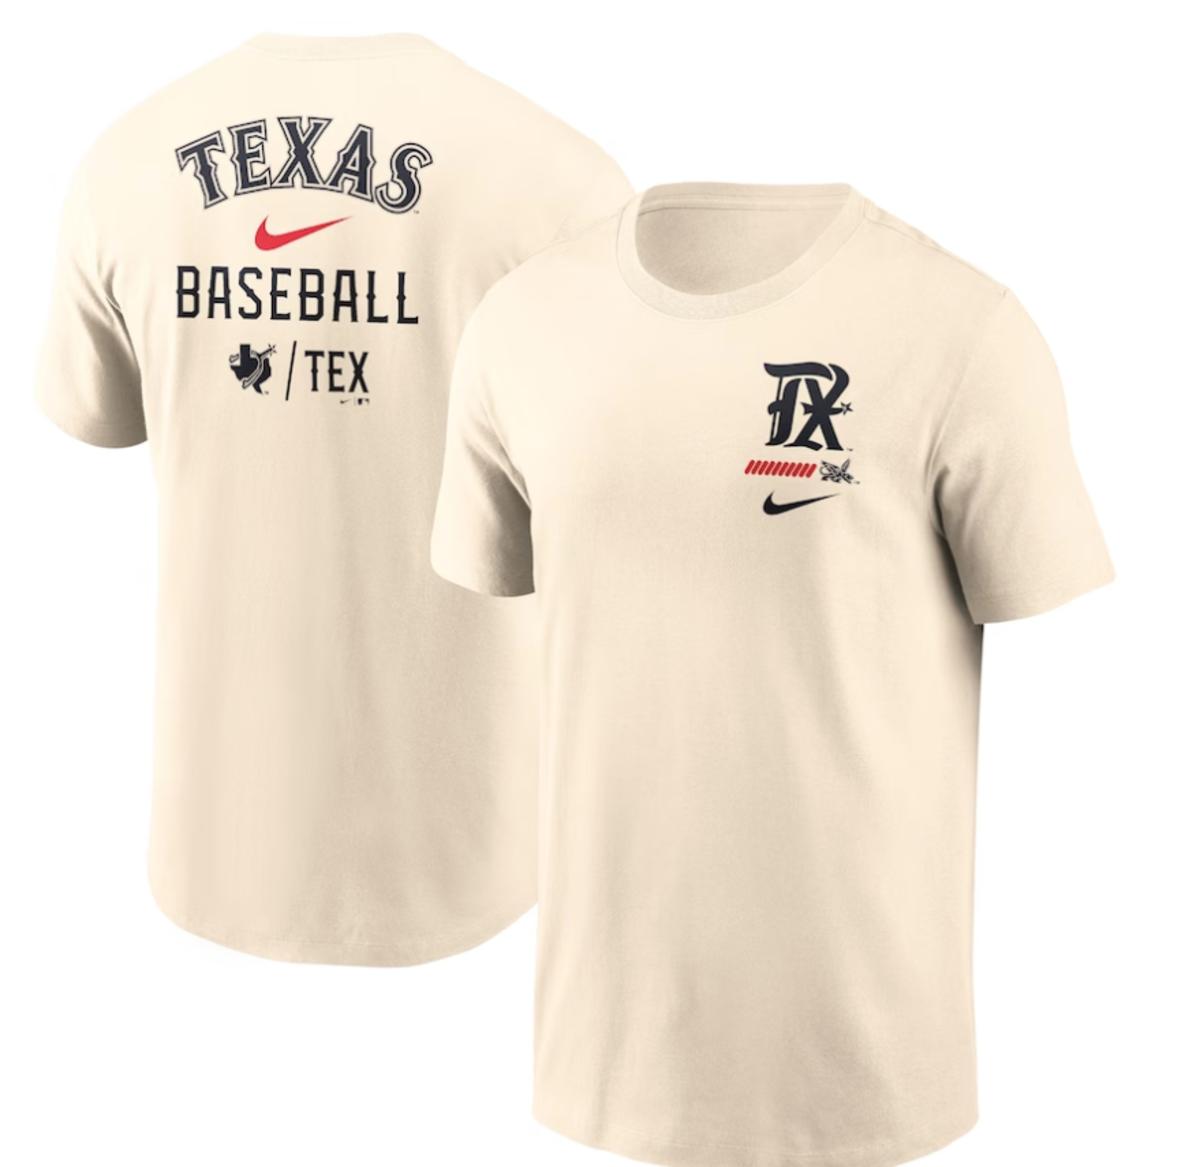 What do y'all think the Rangers' City Connect Jerseys will be like